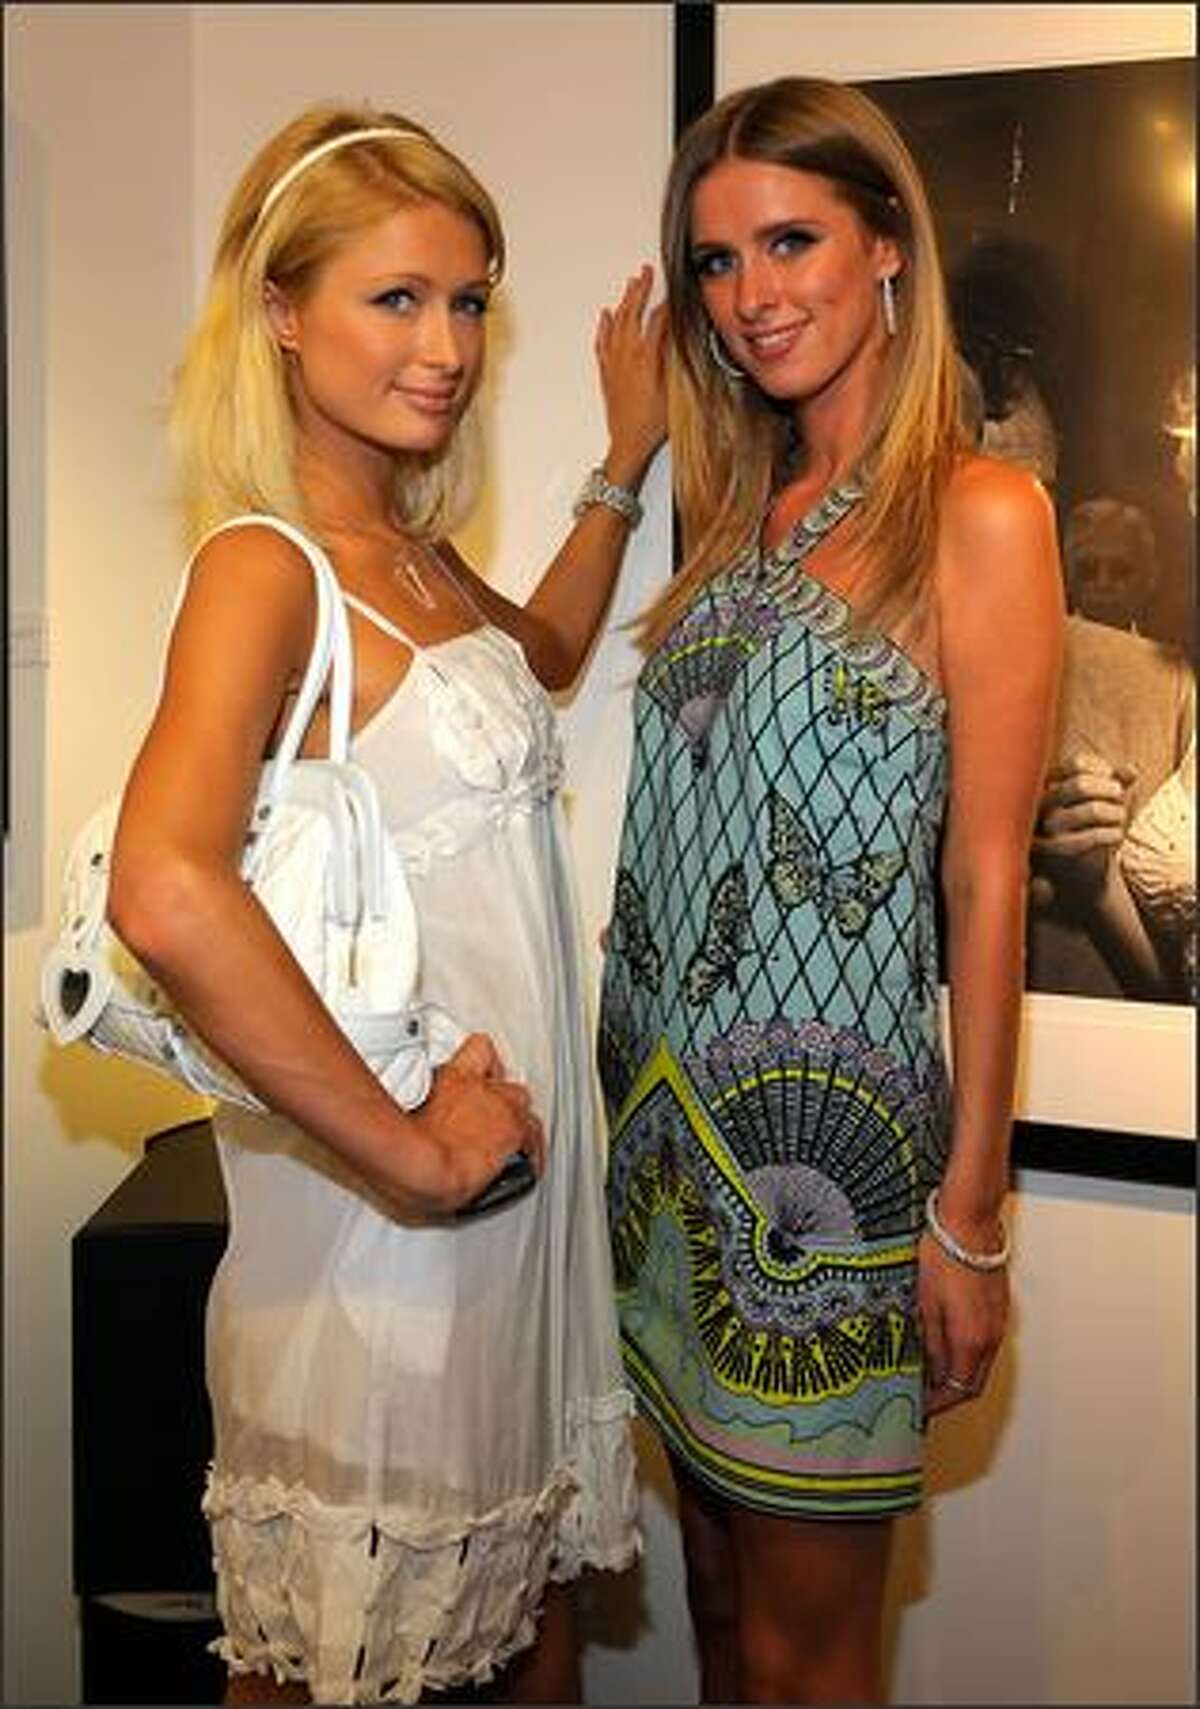 Socialites Paris Hilton (L) and Nicky Hilton attend the opening of "The Good Life: The Photographs Of Slim Aarons and Murray Garrett" at the Photographer's Gallery in Los Angeles, California.